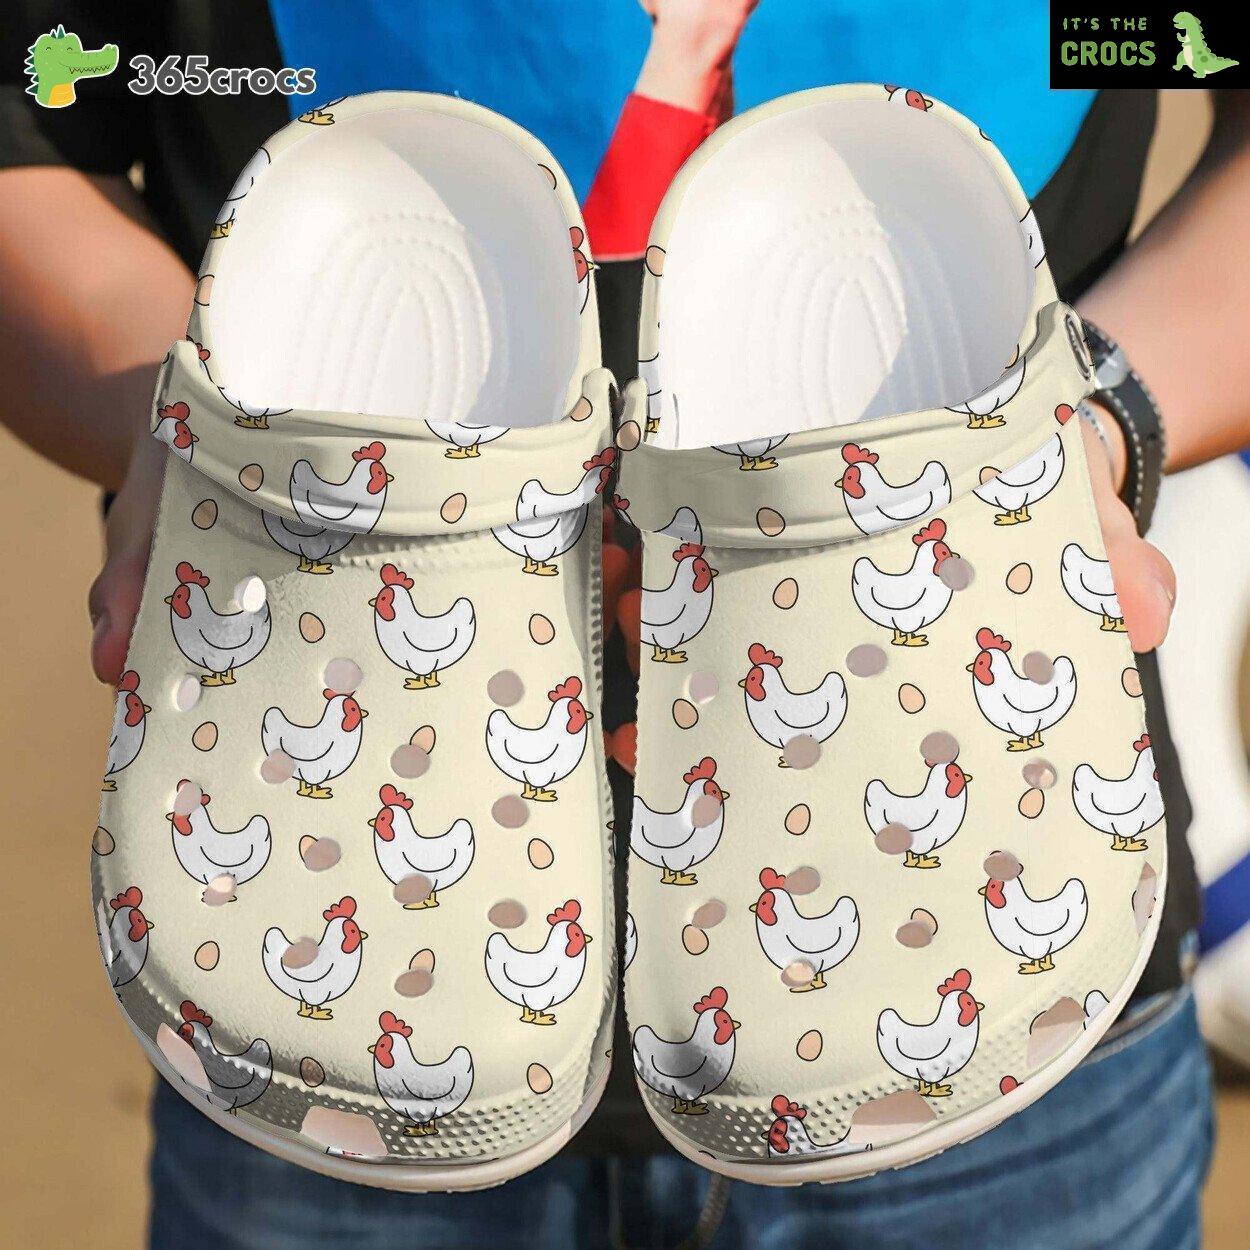 Chickens And Eggs Croc Shoes Cartoon Chicken Shoes Crocbland Clog Gifts For Mom Daughter Niece